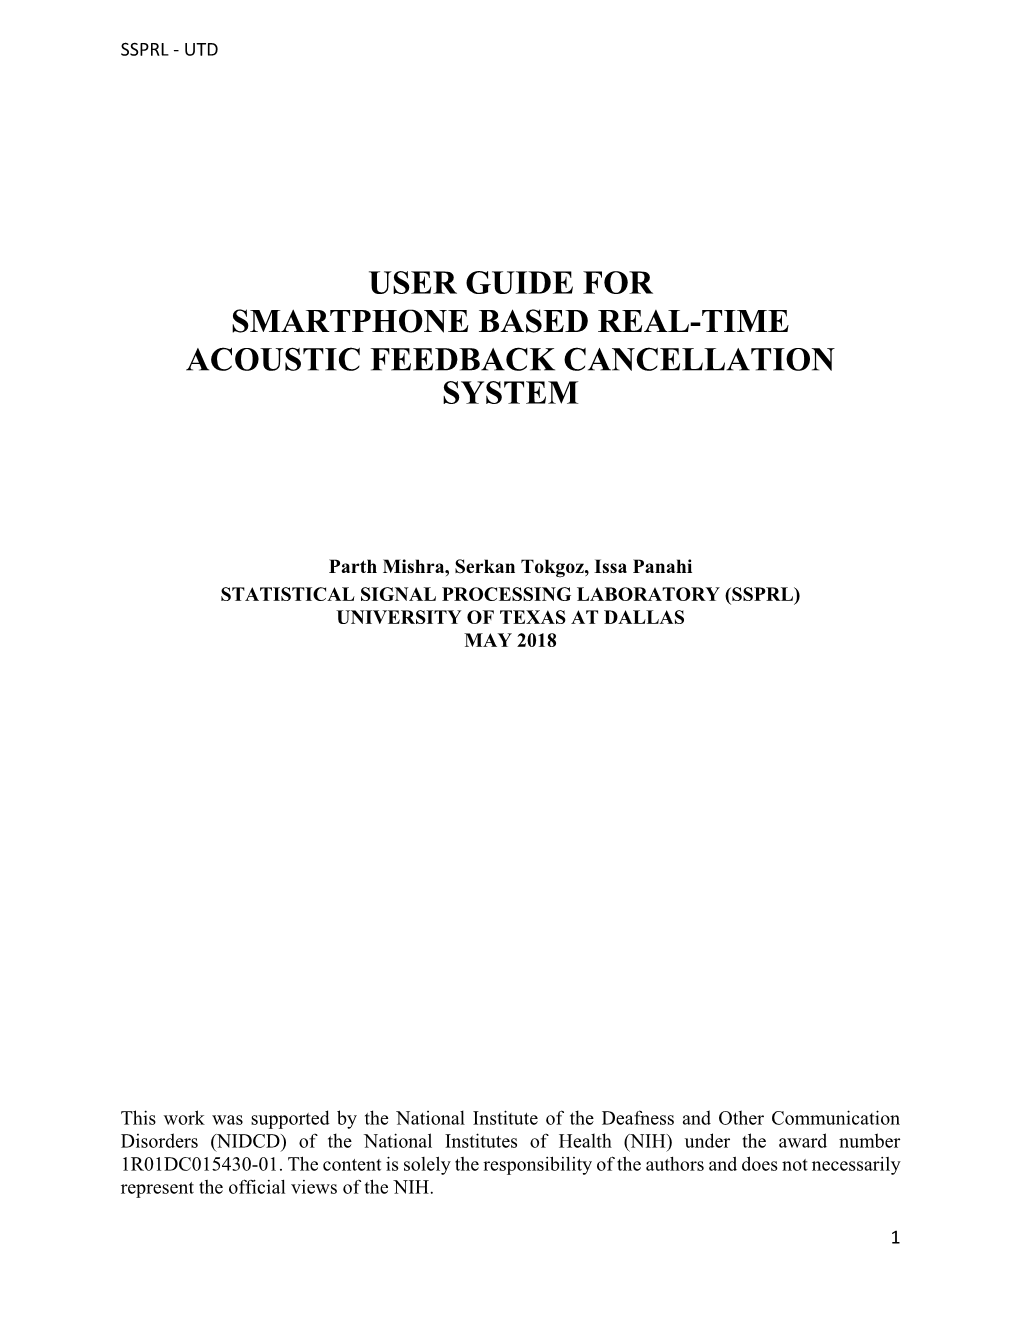 User Guide for Smartphone Based Real-Time Acoustic Feedback Cancellation System